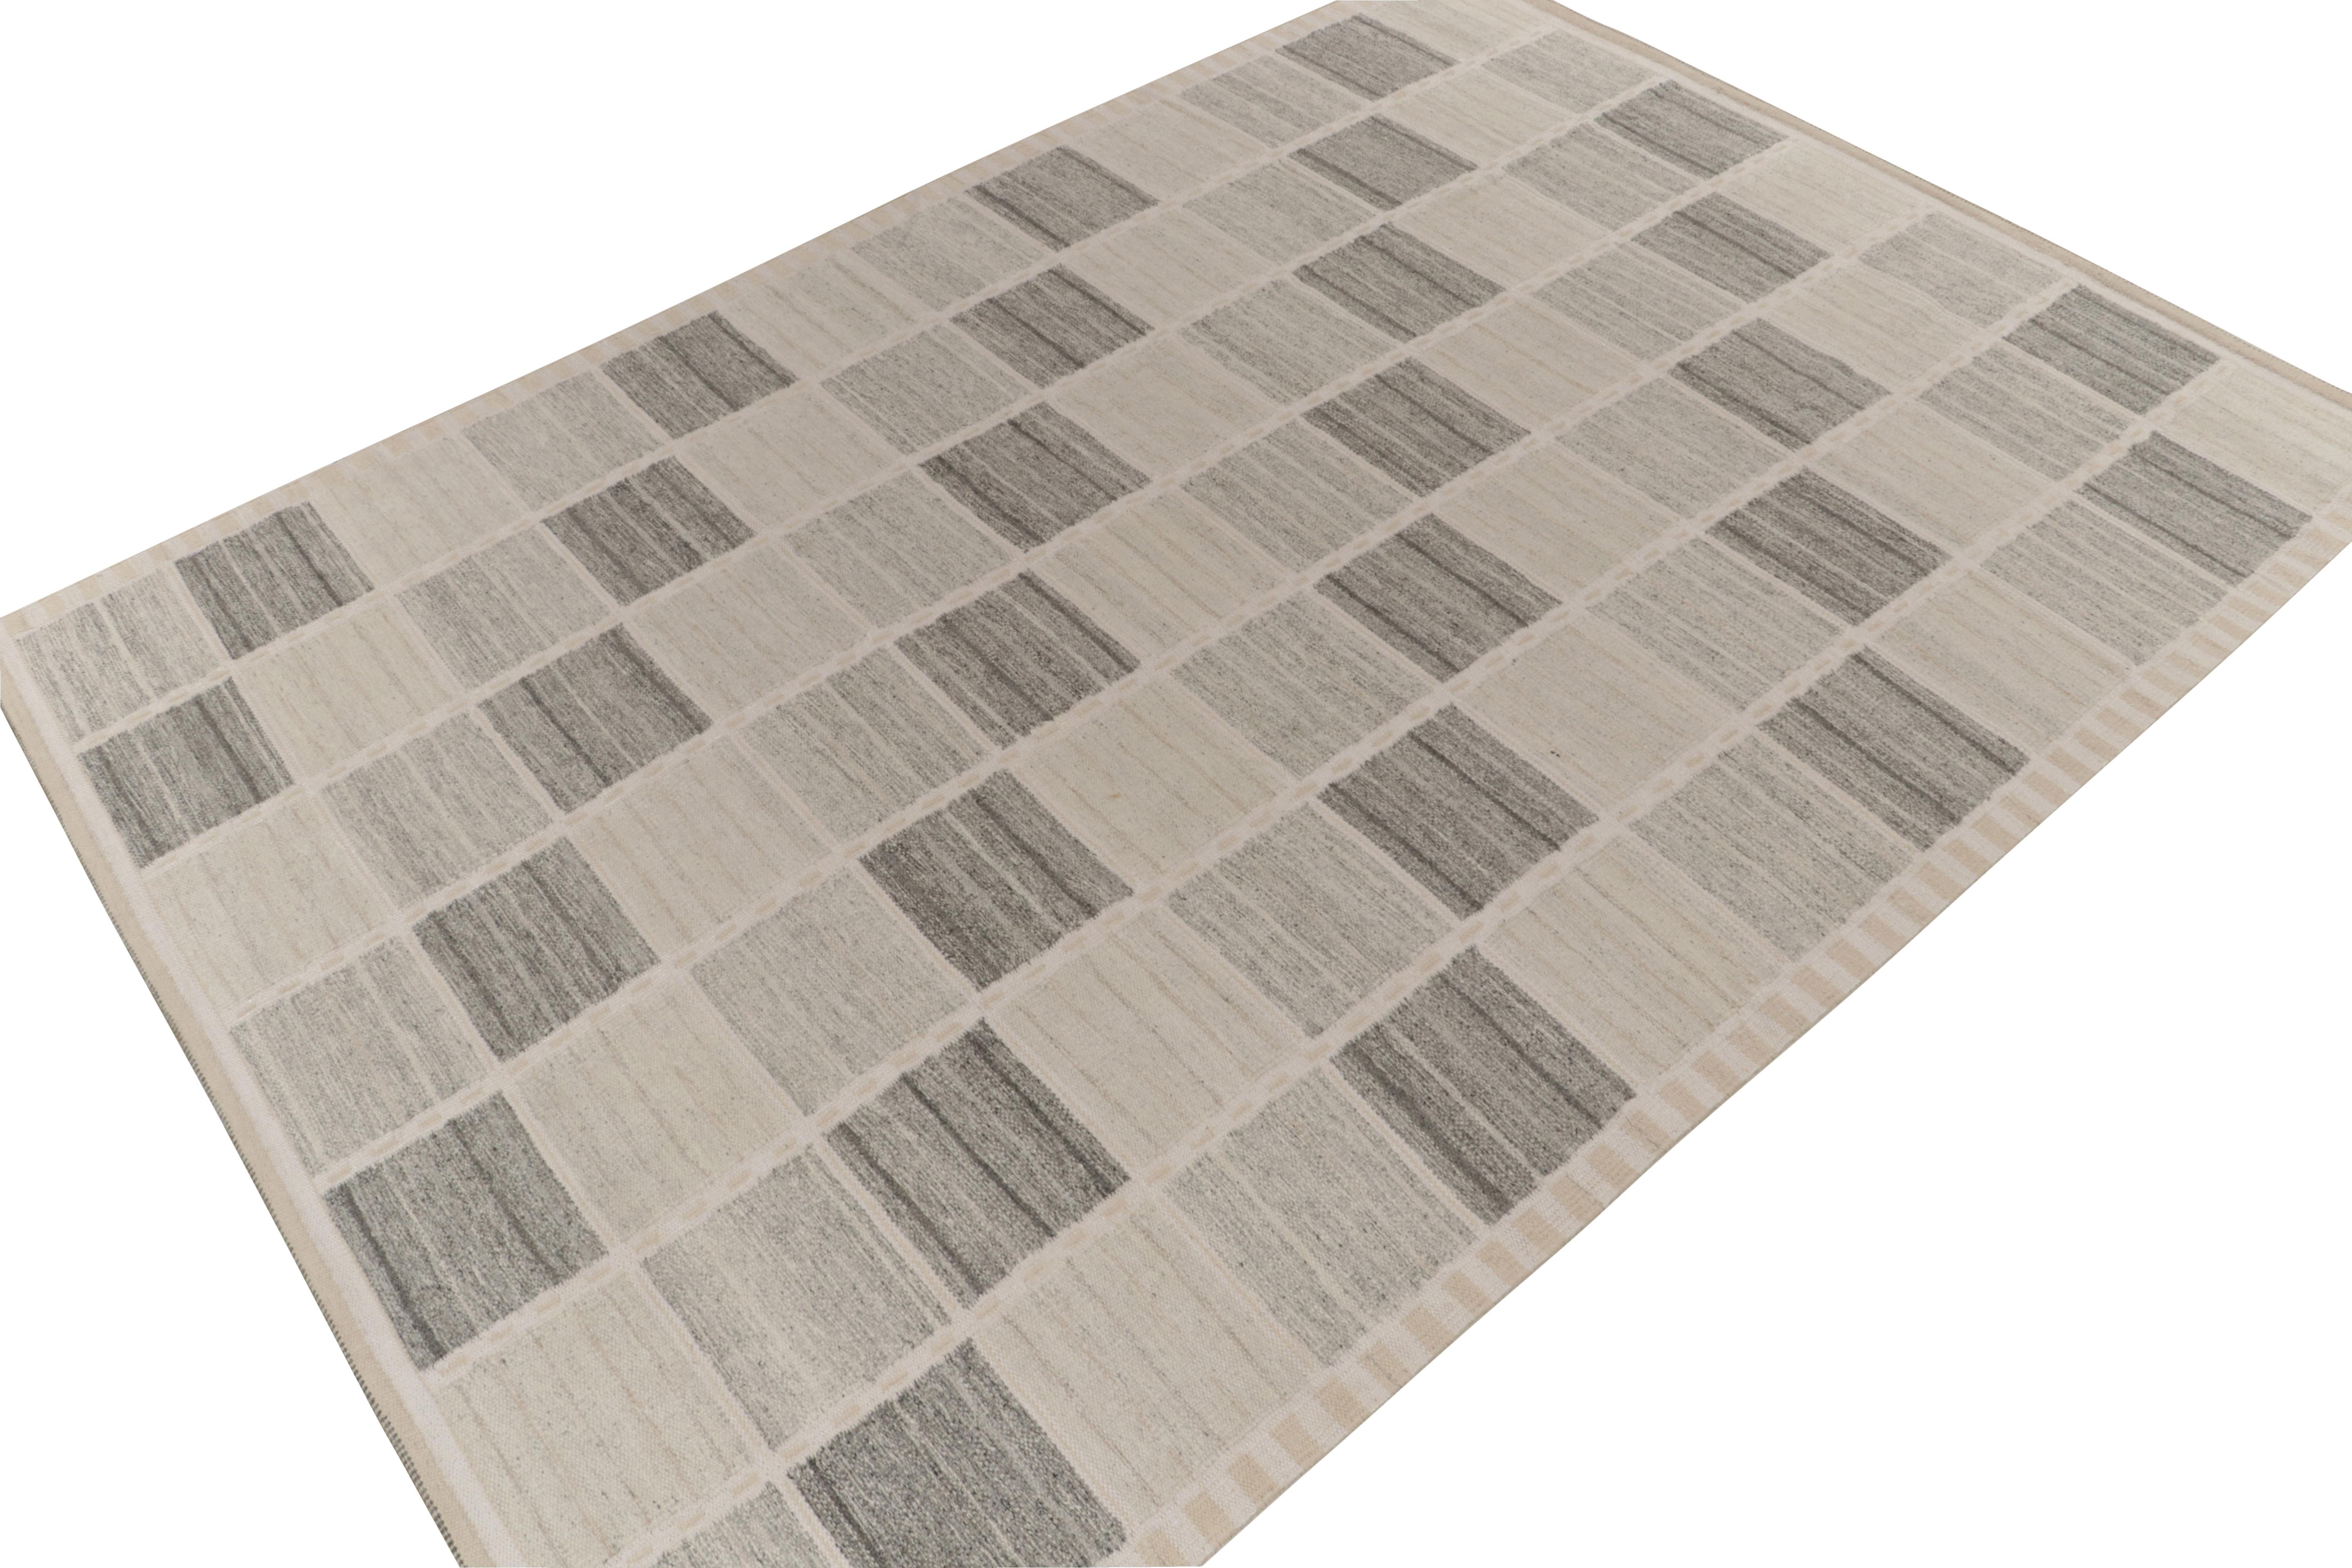 Exemplifying a modern take on Swedish Deco styles, a 6x9 flat weave from Rug & Kilim’s award-winning Scandinavian Kilim collection. 

On the Design: 

The handwoven wool rug enjoys compartmentalisation in gray and white tones—alternating diagonally